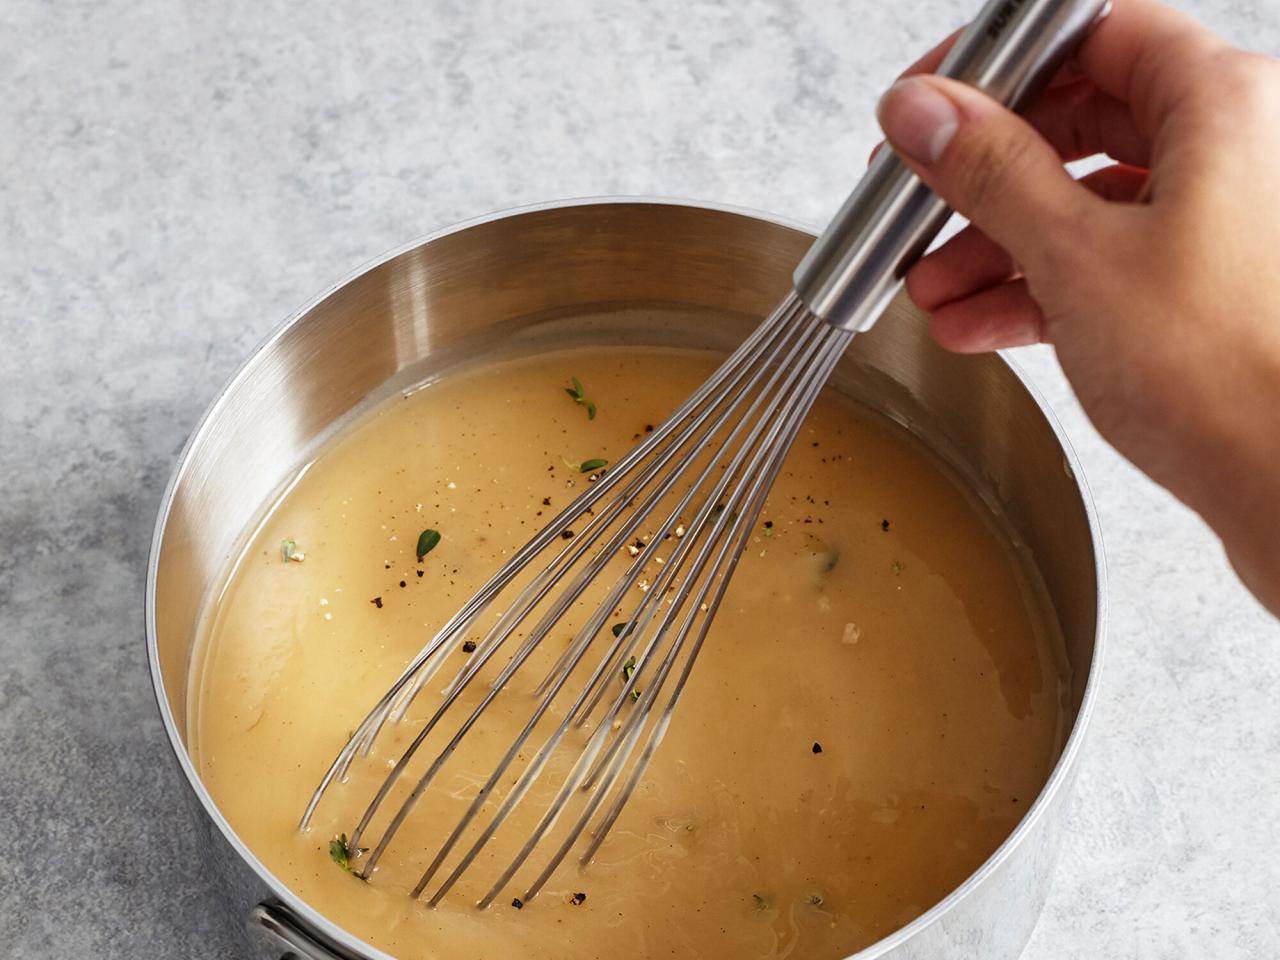 https://food.fnr.sndimg.com/content/dam/images/food/products/2020/1/7/rx_sur-la-table-stainless-steel-french-whisk.jpeg.rend.hgtvcom.1280.960.suffix/1578433243570.jpeg